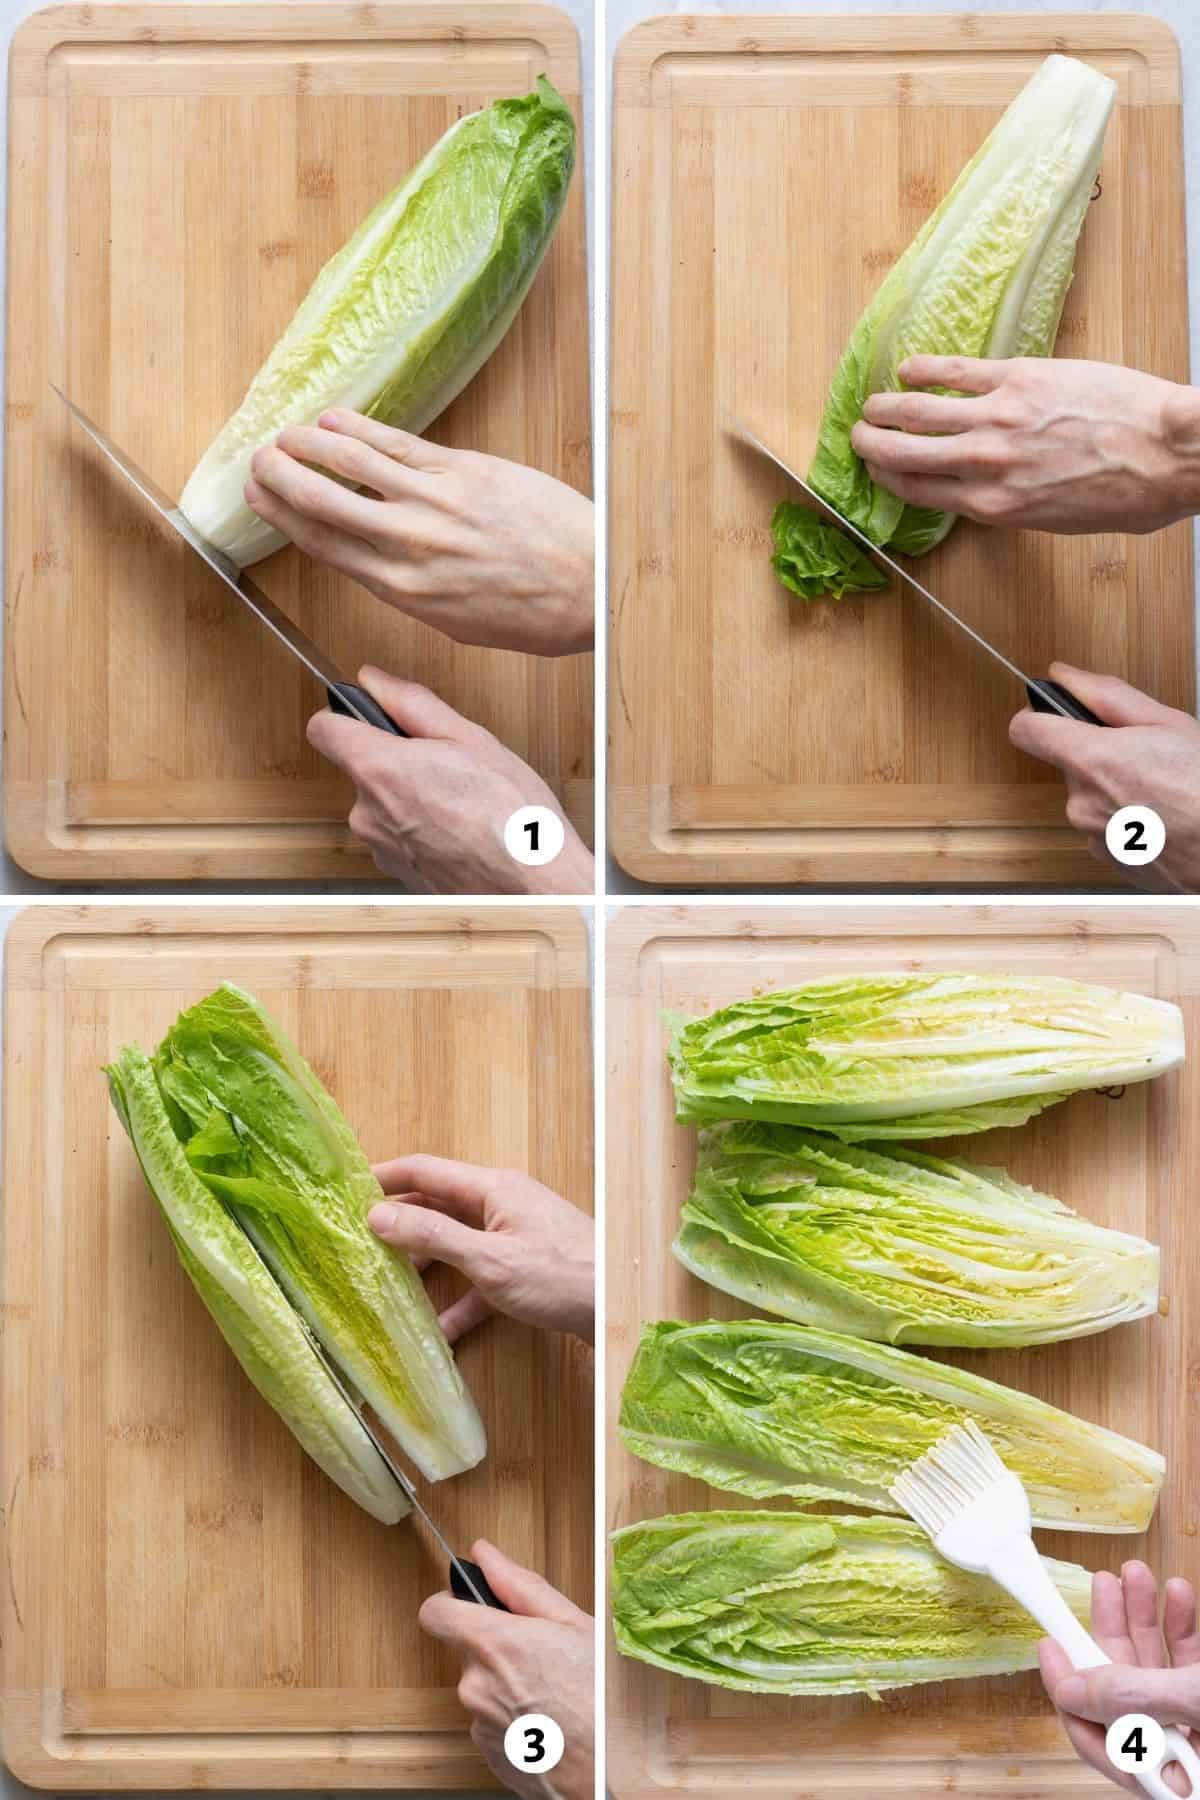 4 image collage cutting romaine lettuce on cutting board for grilling. Cut off end, cut off top, cut in half lengthwise, and brush with oil.